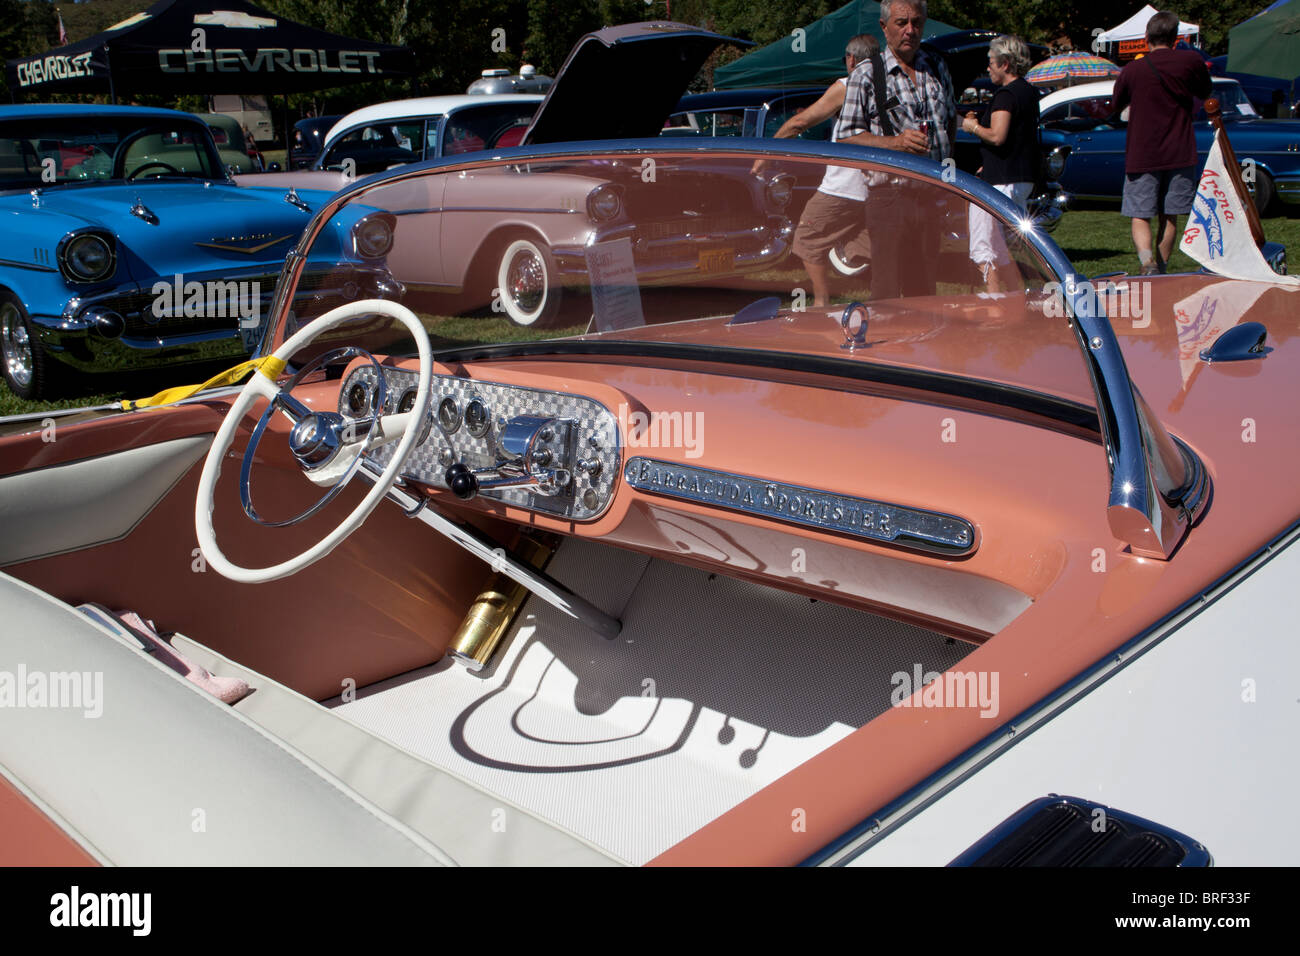 A 1955 Arenacraft Barracuda Sportster boat at the 2010 Ironstone Concours D'elegance Stock Photo